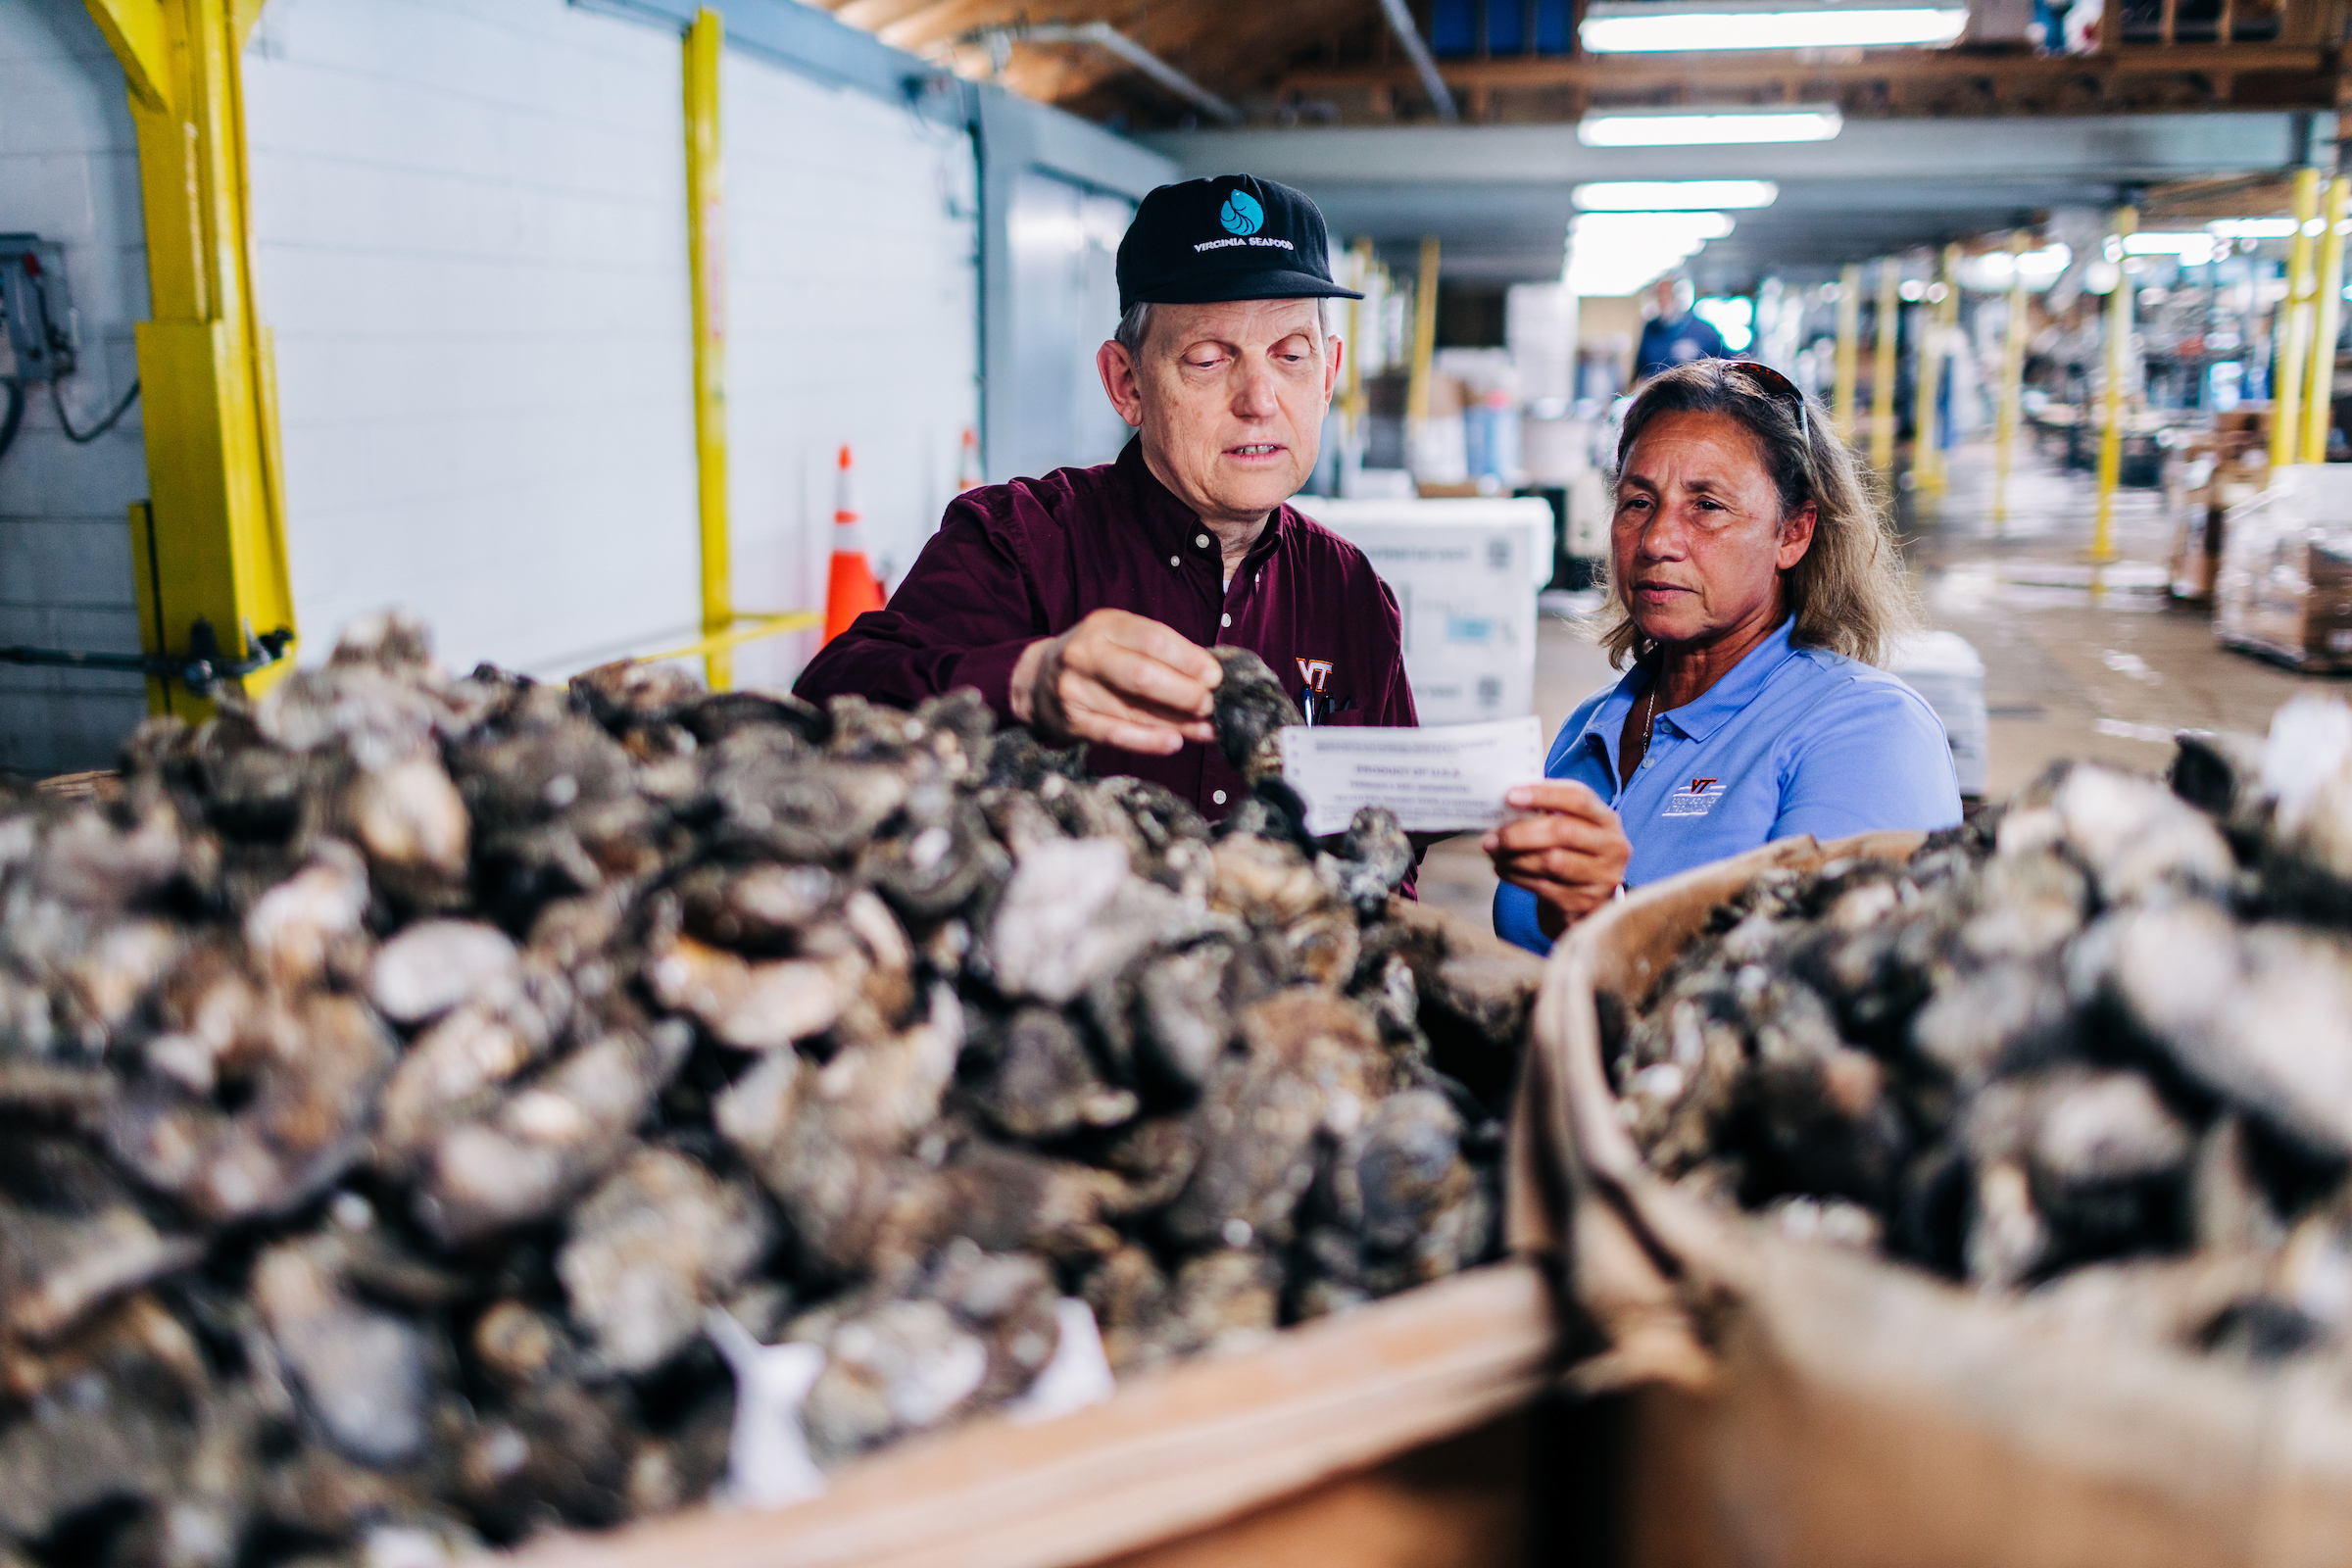 Safety specialists behind boxes of oysters